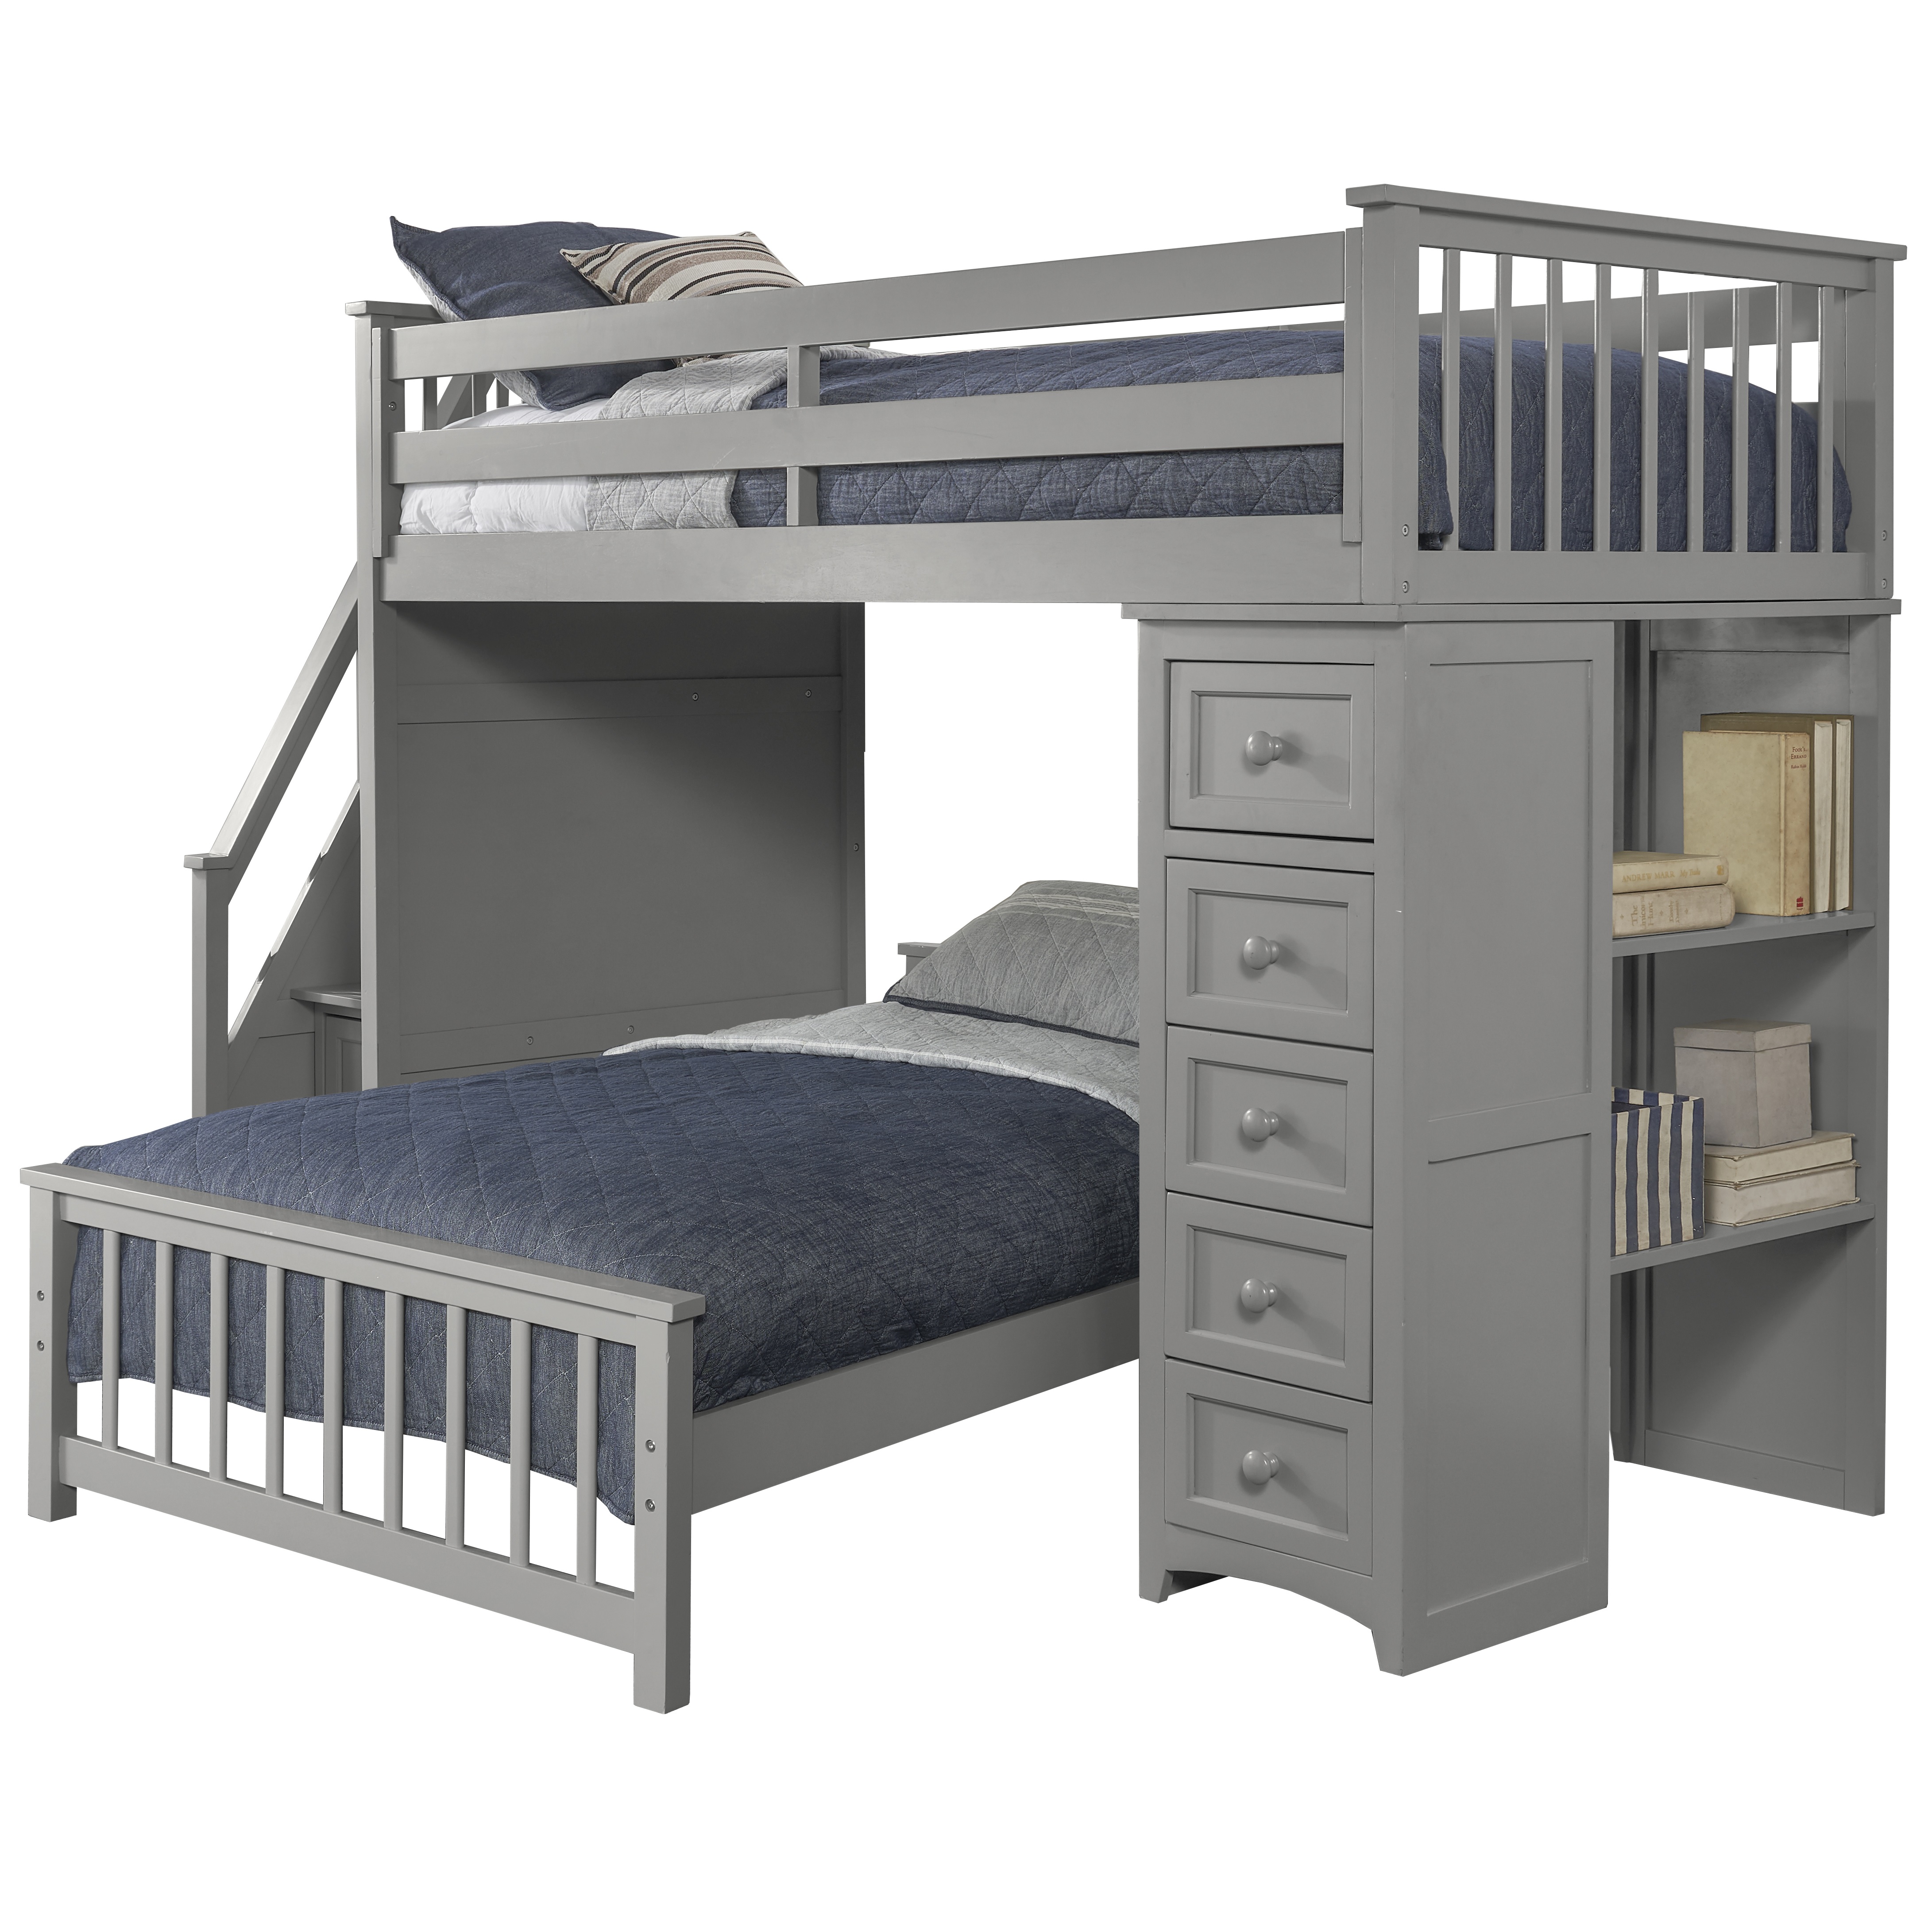 Hillsdale Schoolhouse 4.0 Wood Loft Bed with Chest and Lower Bed